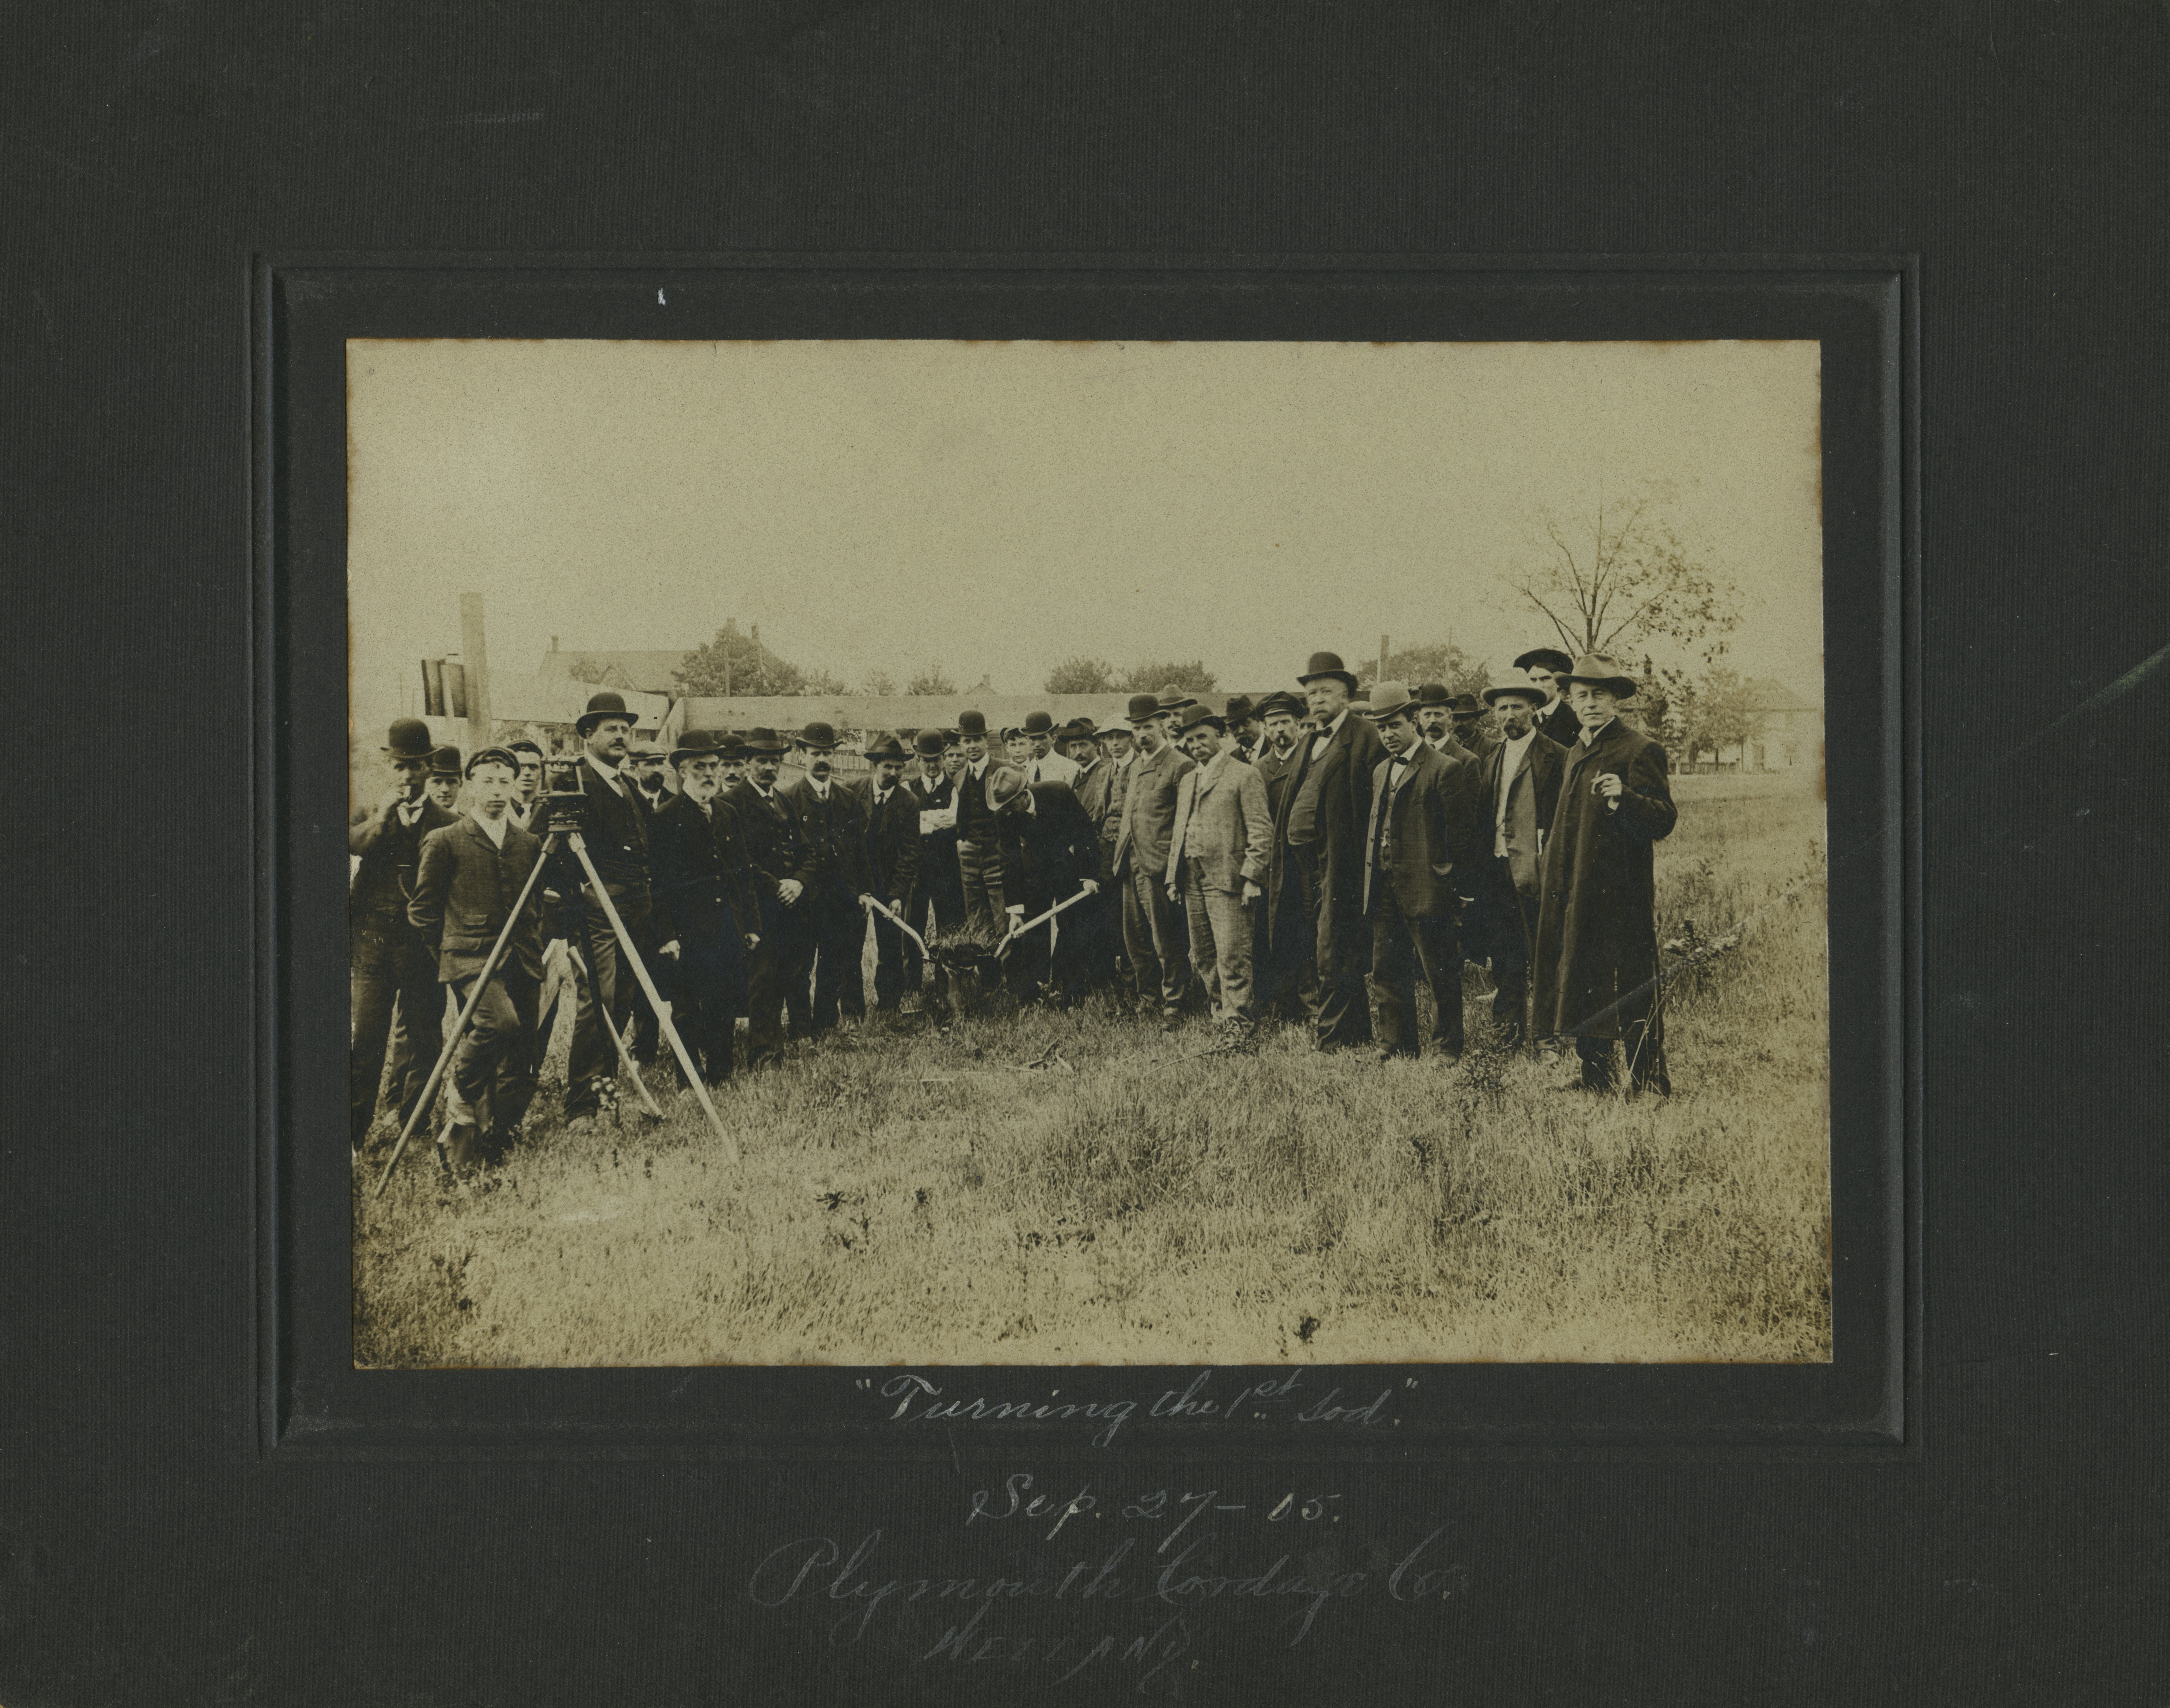 A very old photograph of a group of men standing outdoors.